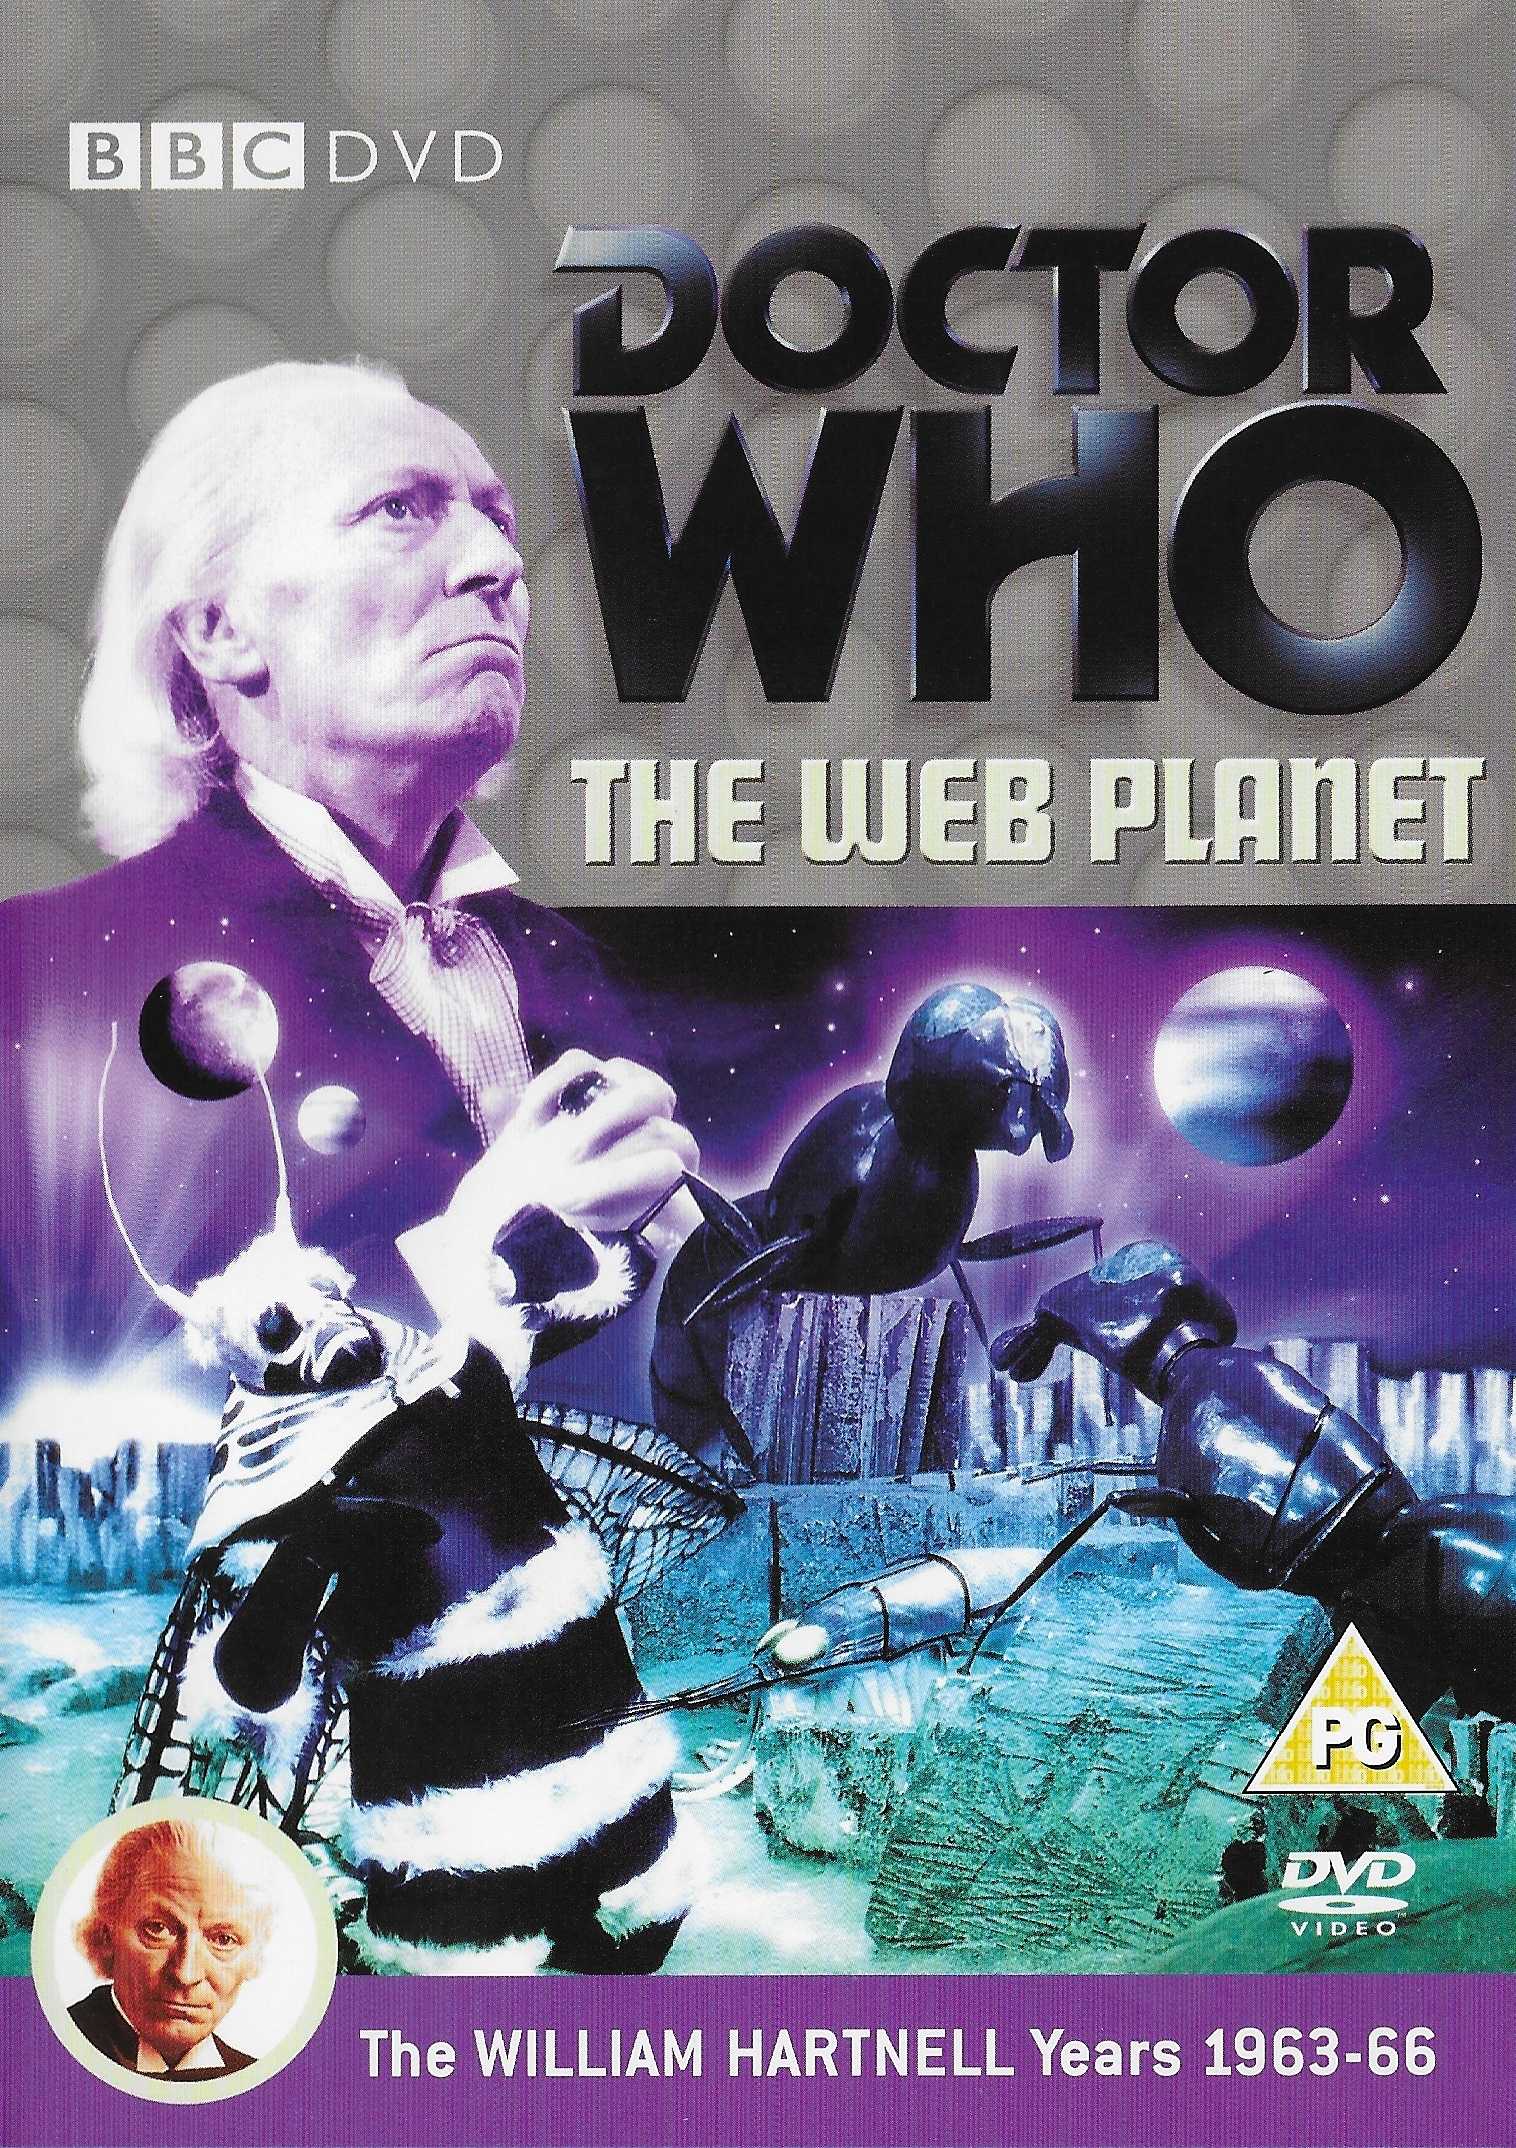 Picture of BBCDVD 1355 Doctor Who - The web planet by artist Bill Strutton from the BBC records and Tapes library